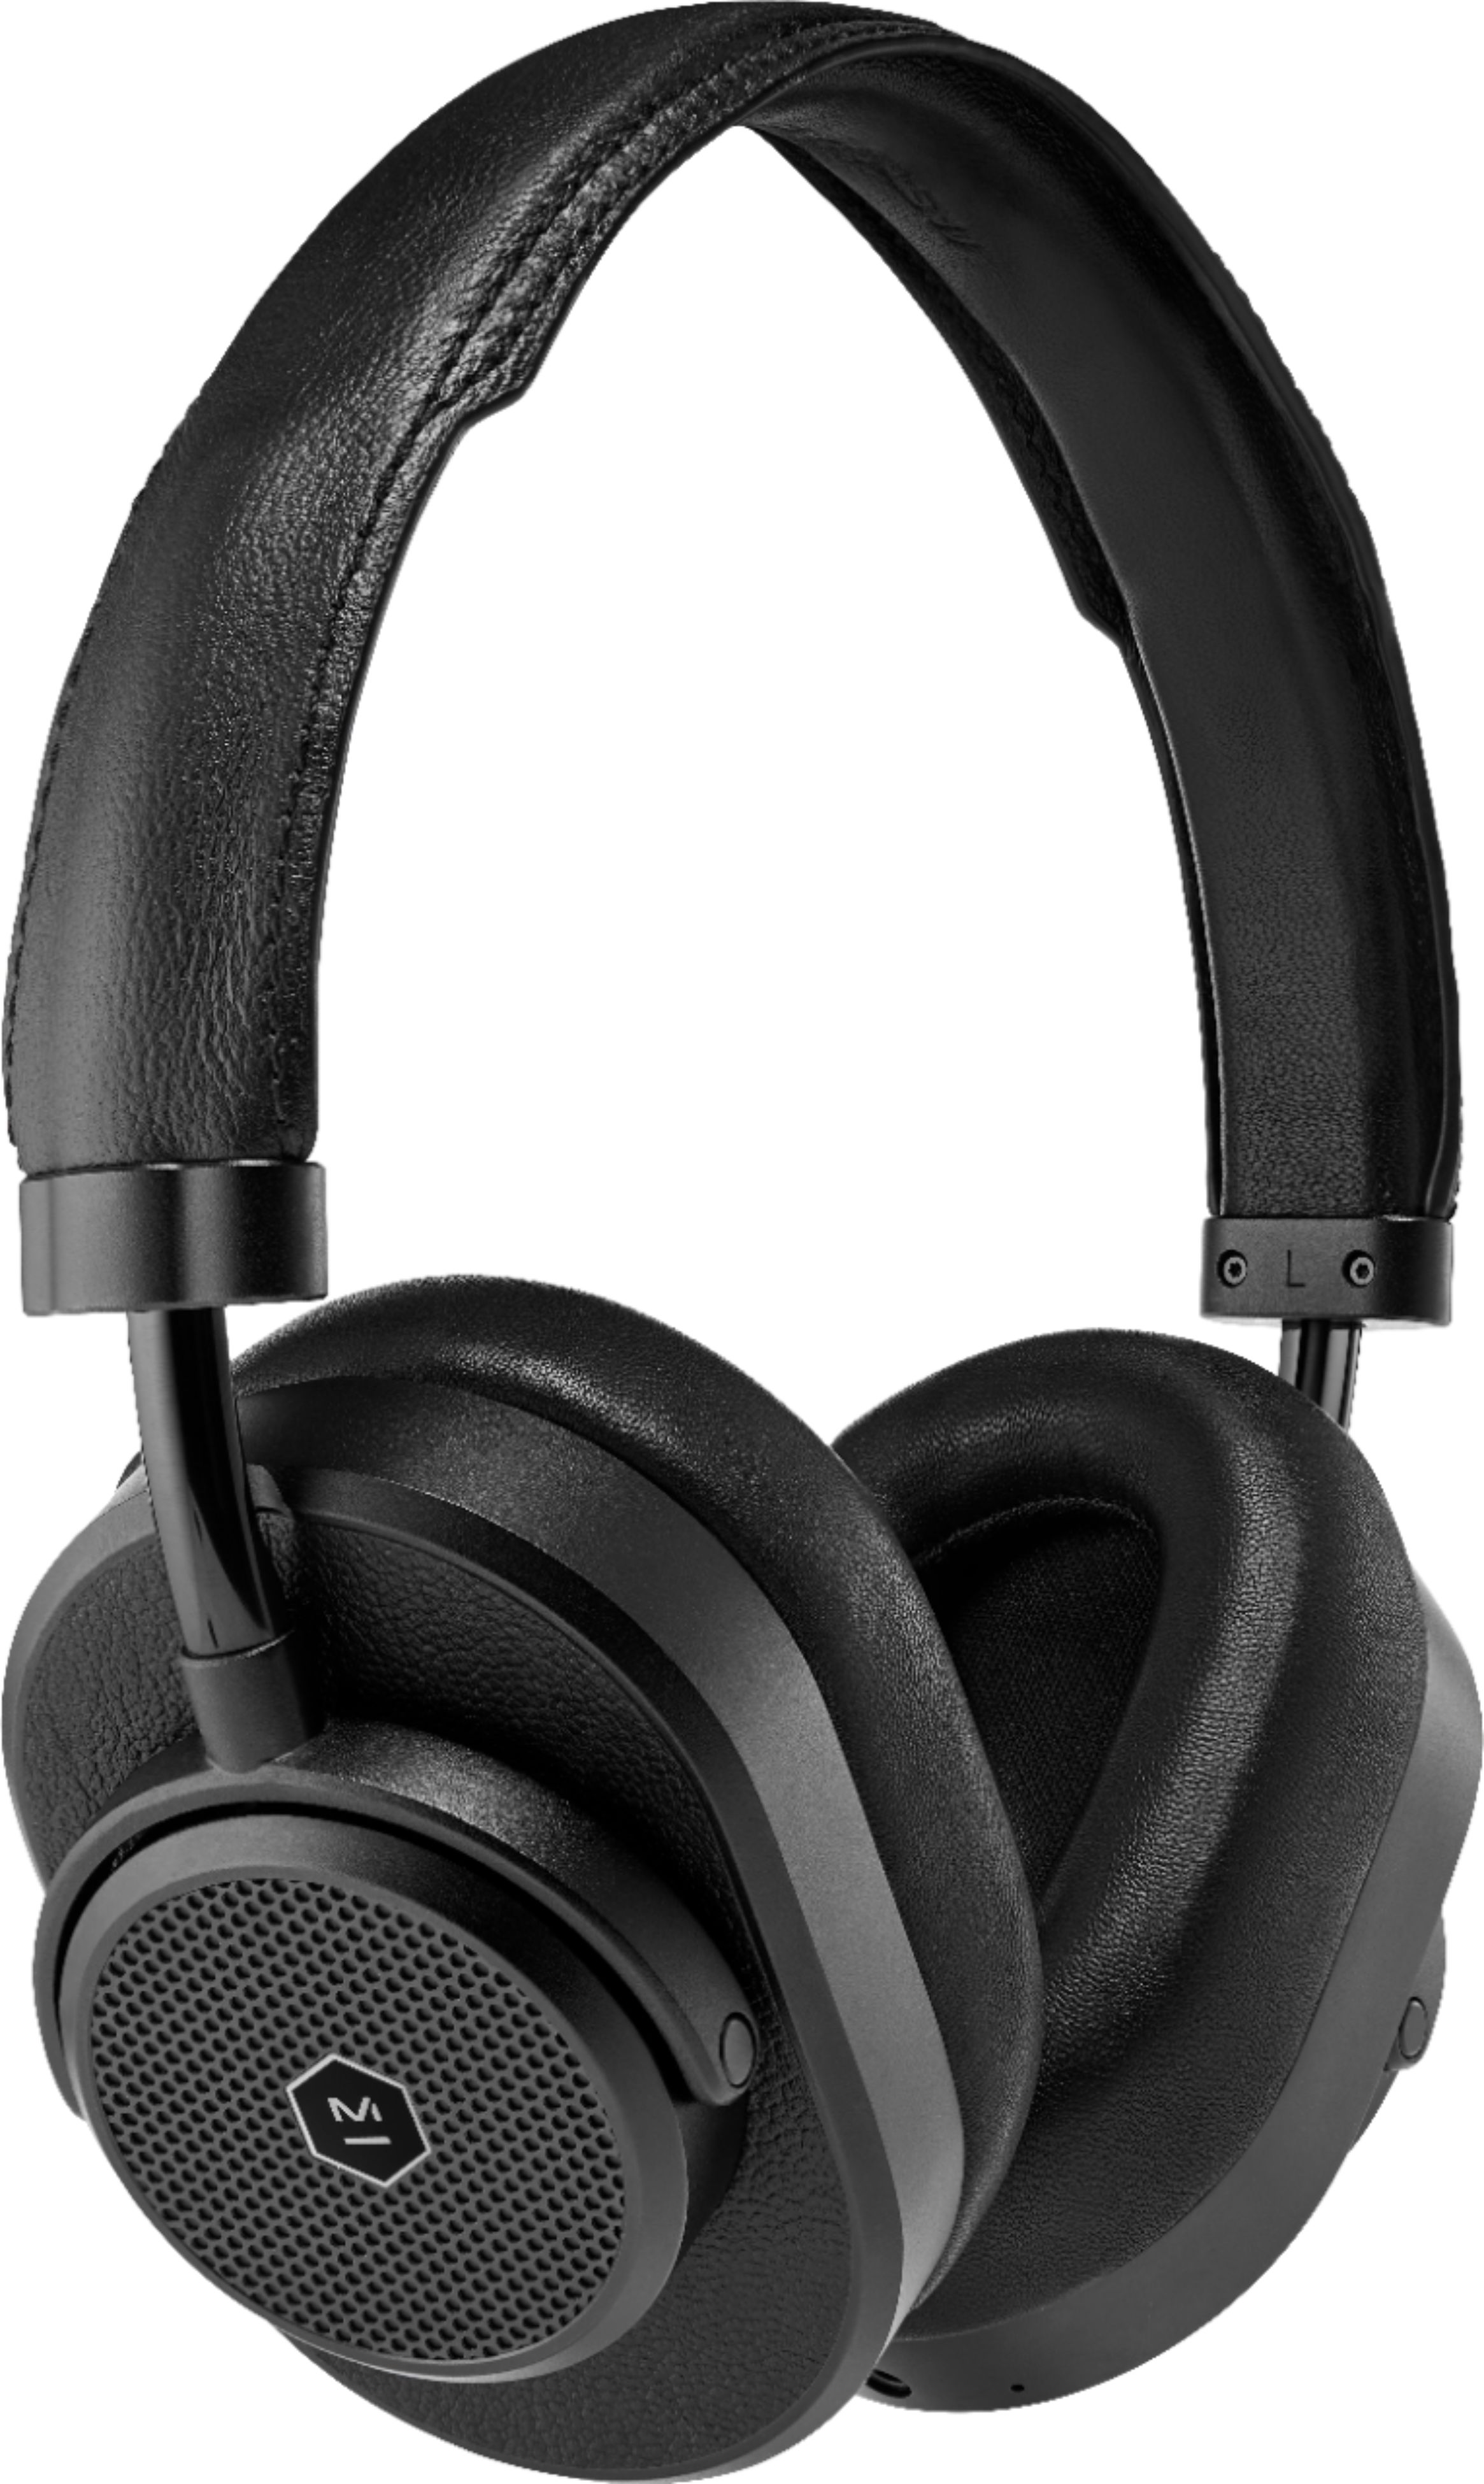 Angle View: Master & Dynamic - MW65 Wireless Noise Cancelling Over-the-Ear Headphones - Black